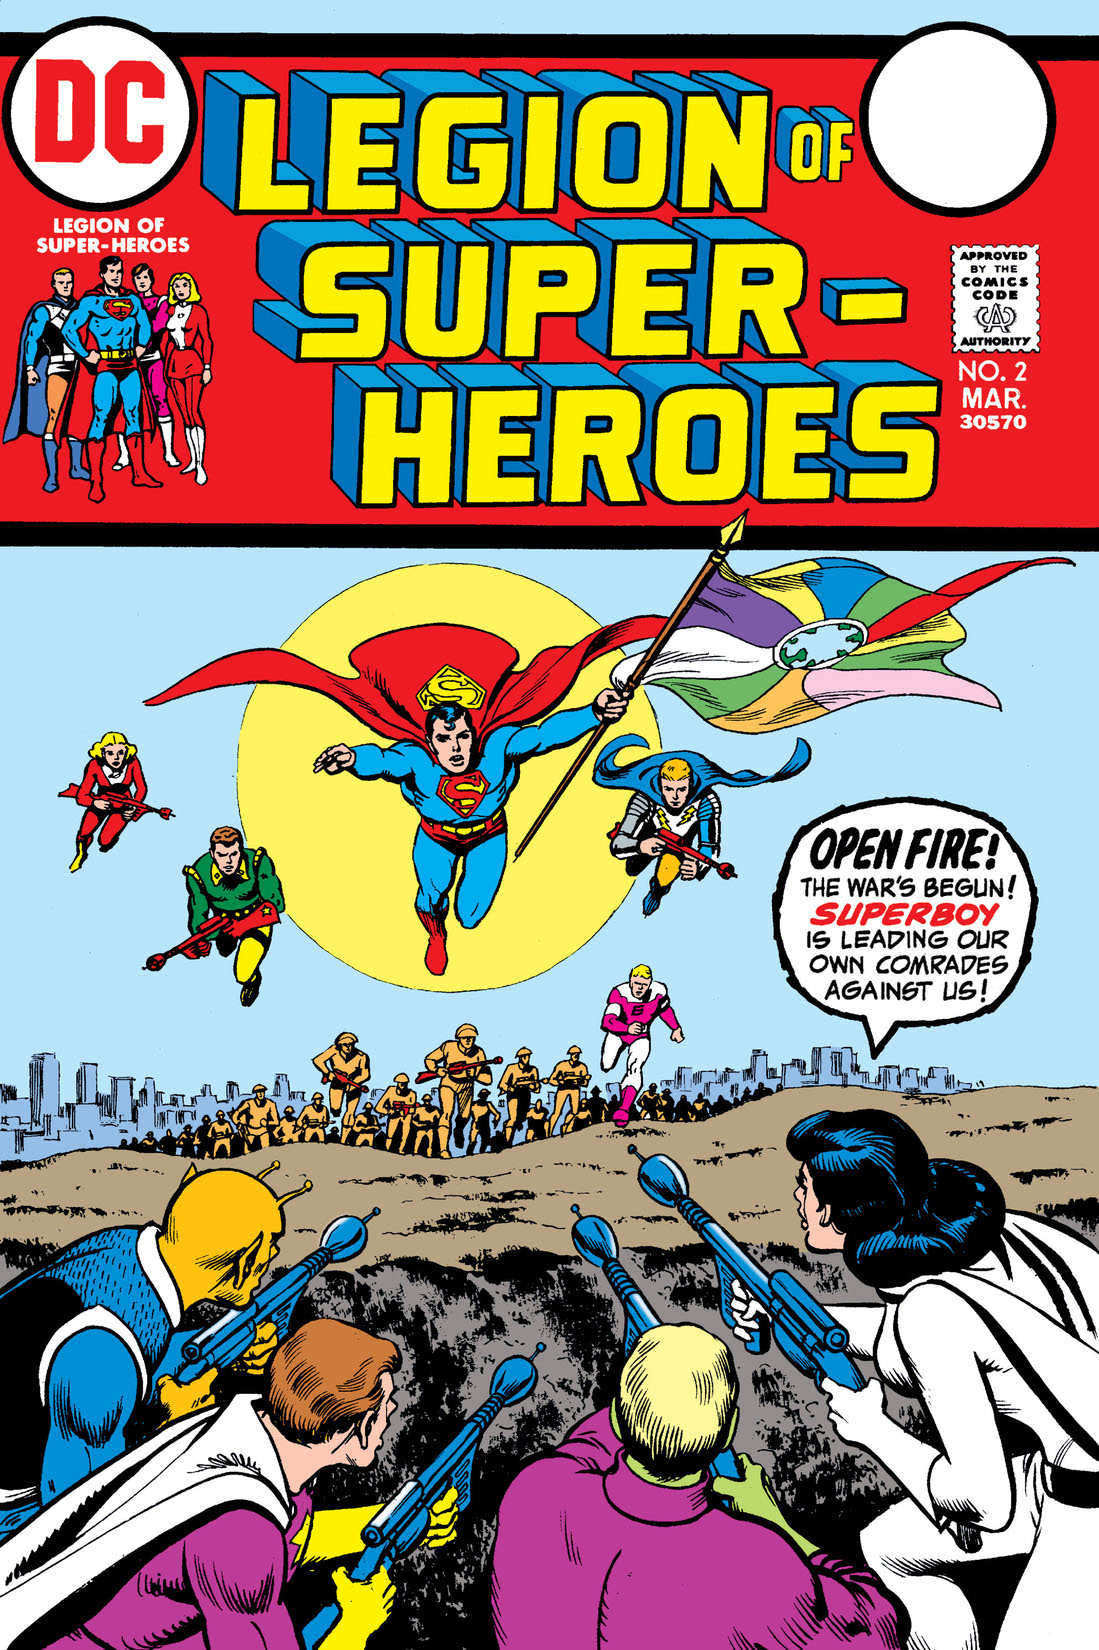 Legion of Super-Heroes (1973-1973) #2 preview images